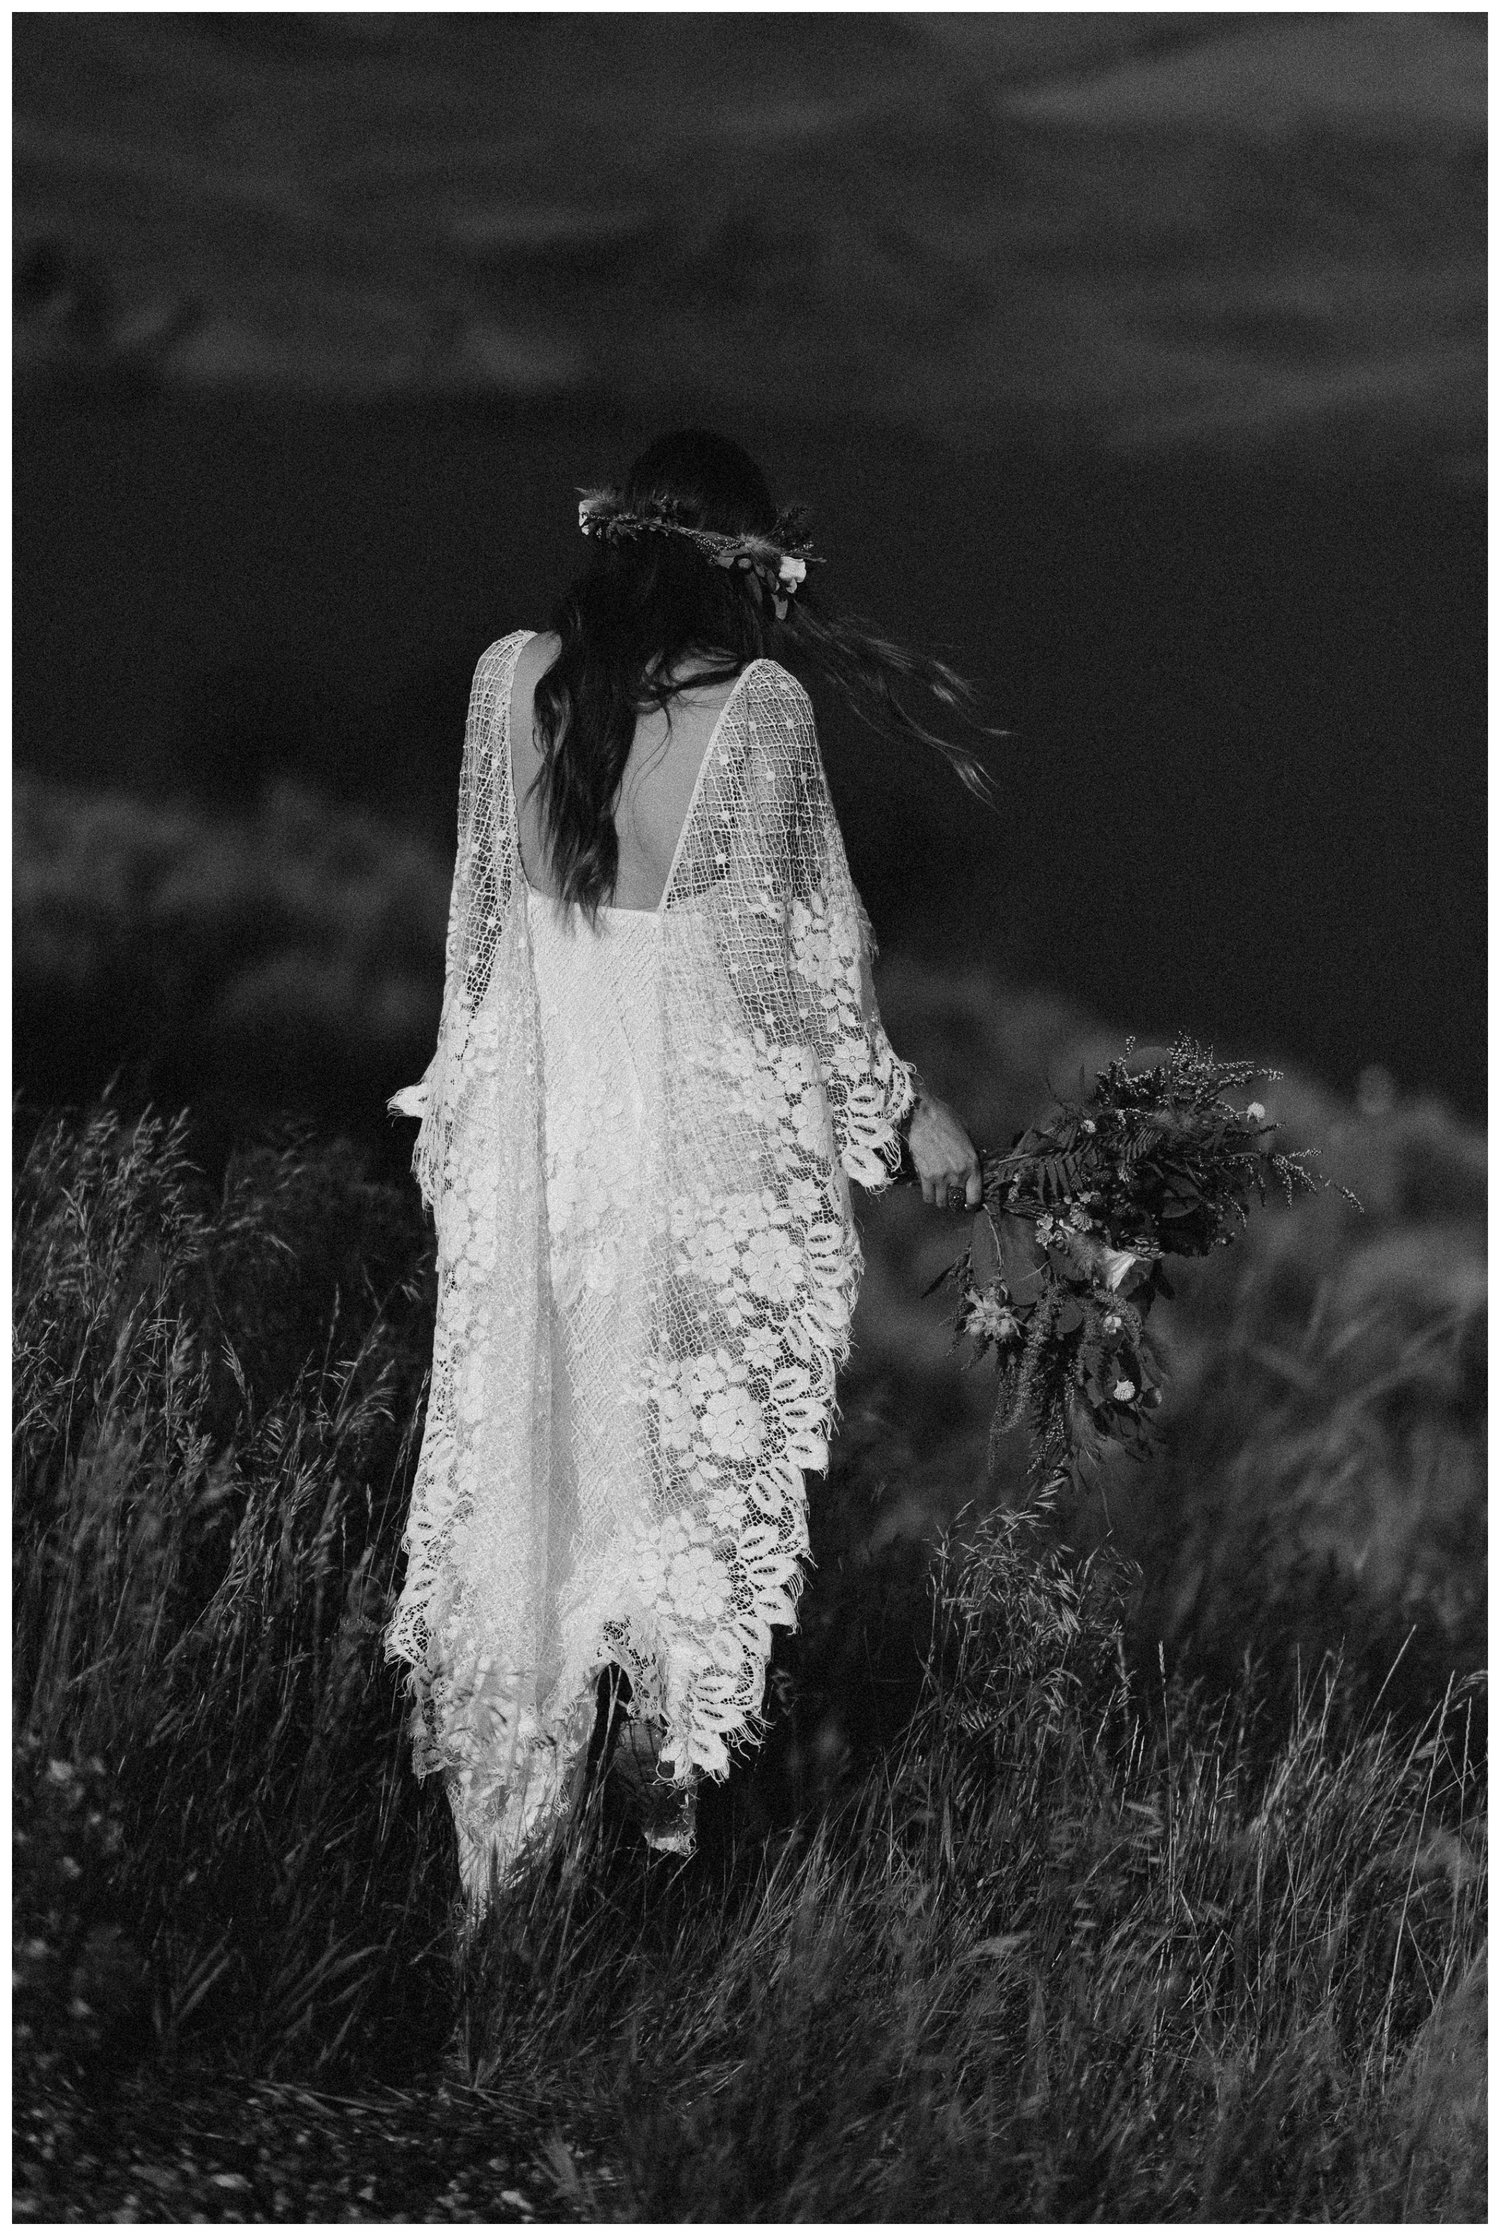 Bride walking in a grassy meadow, wearing a white dress, flower crown, and holding a bouquet.  